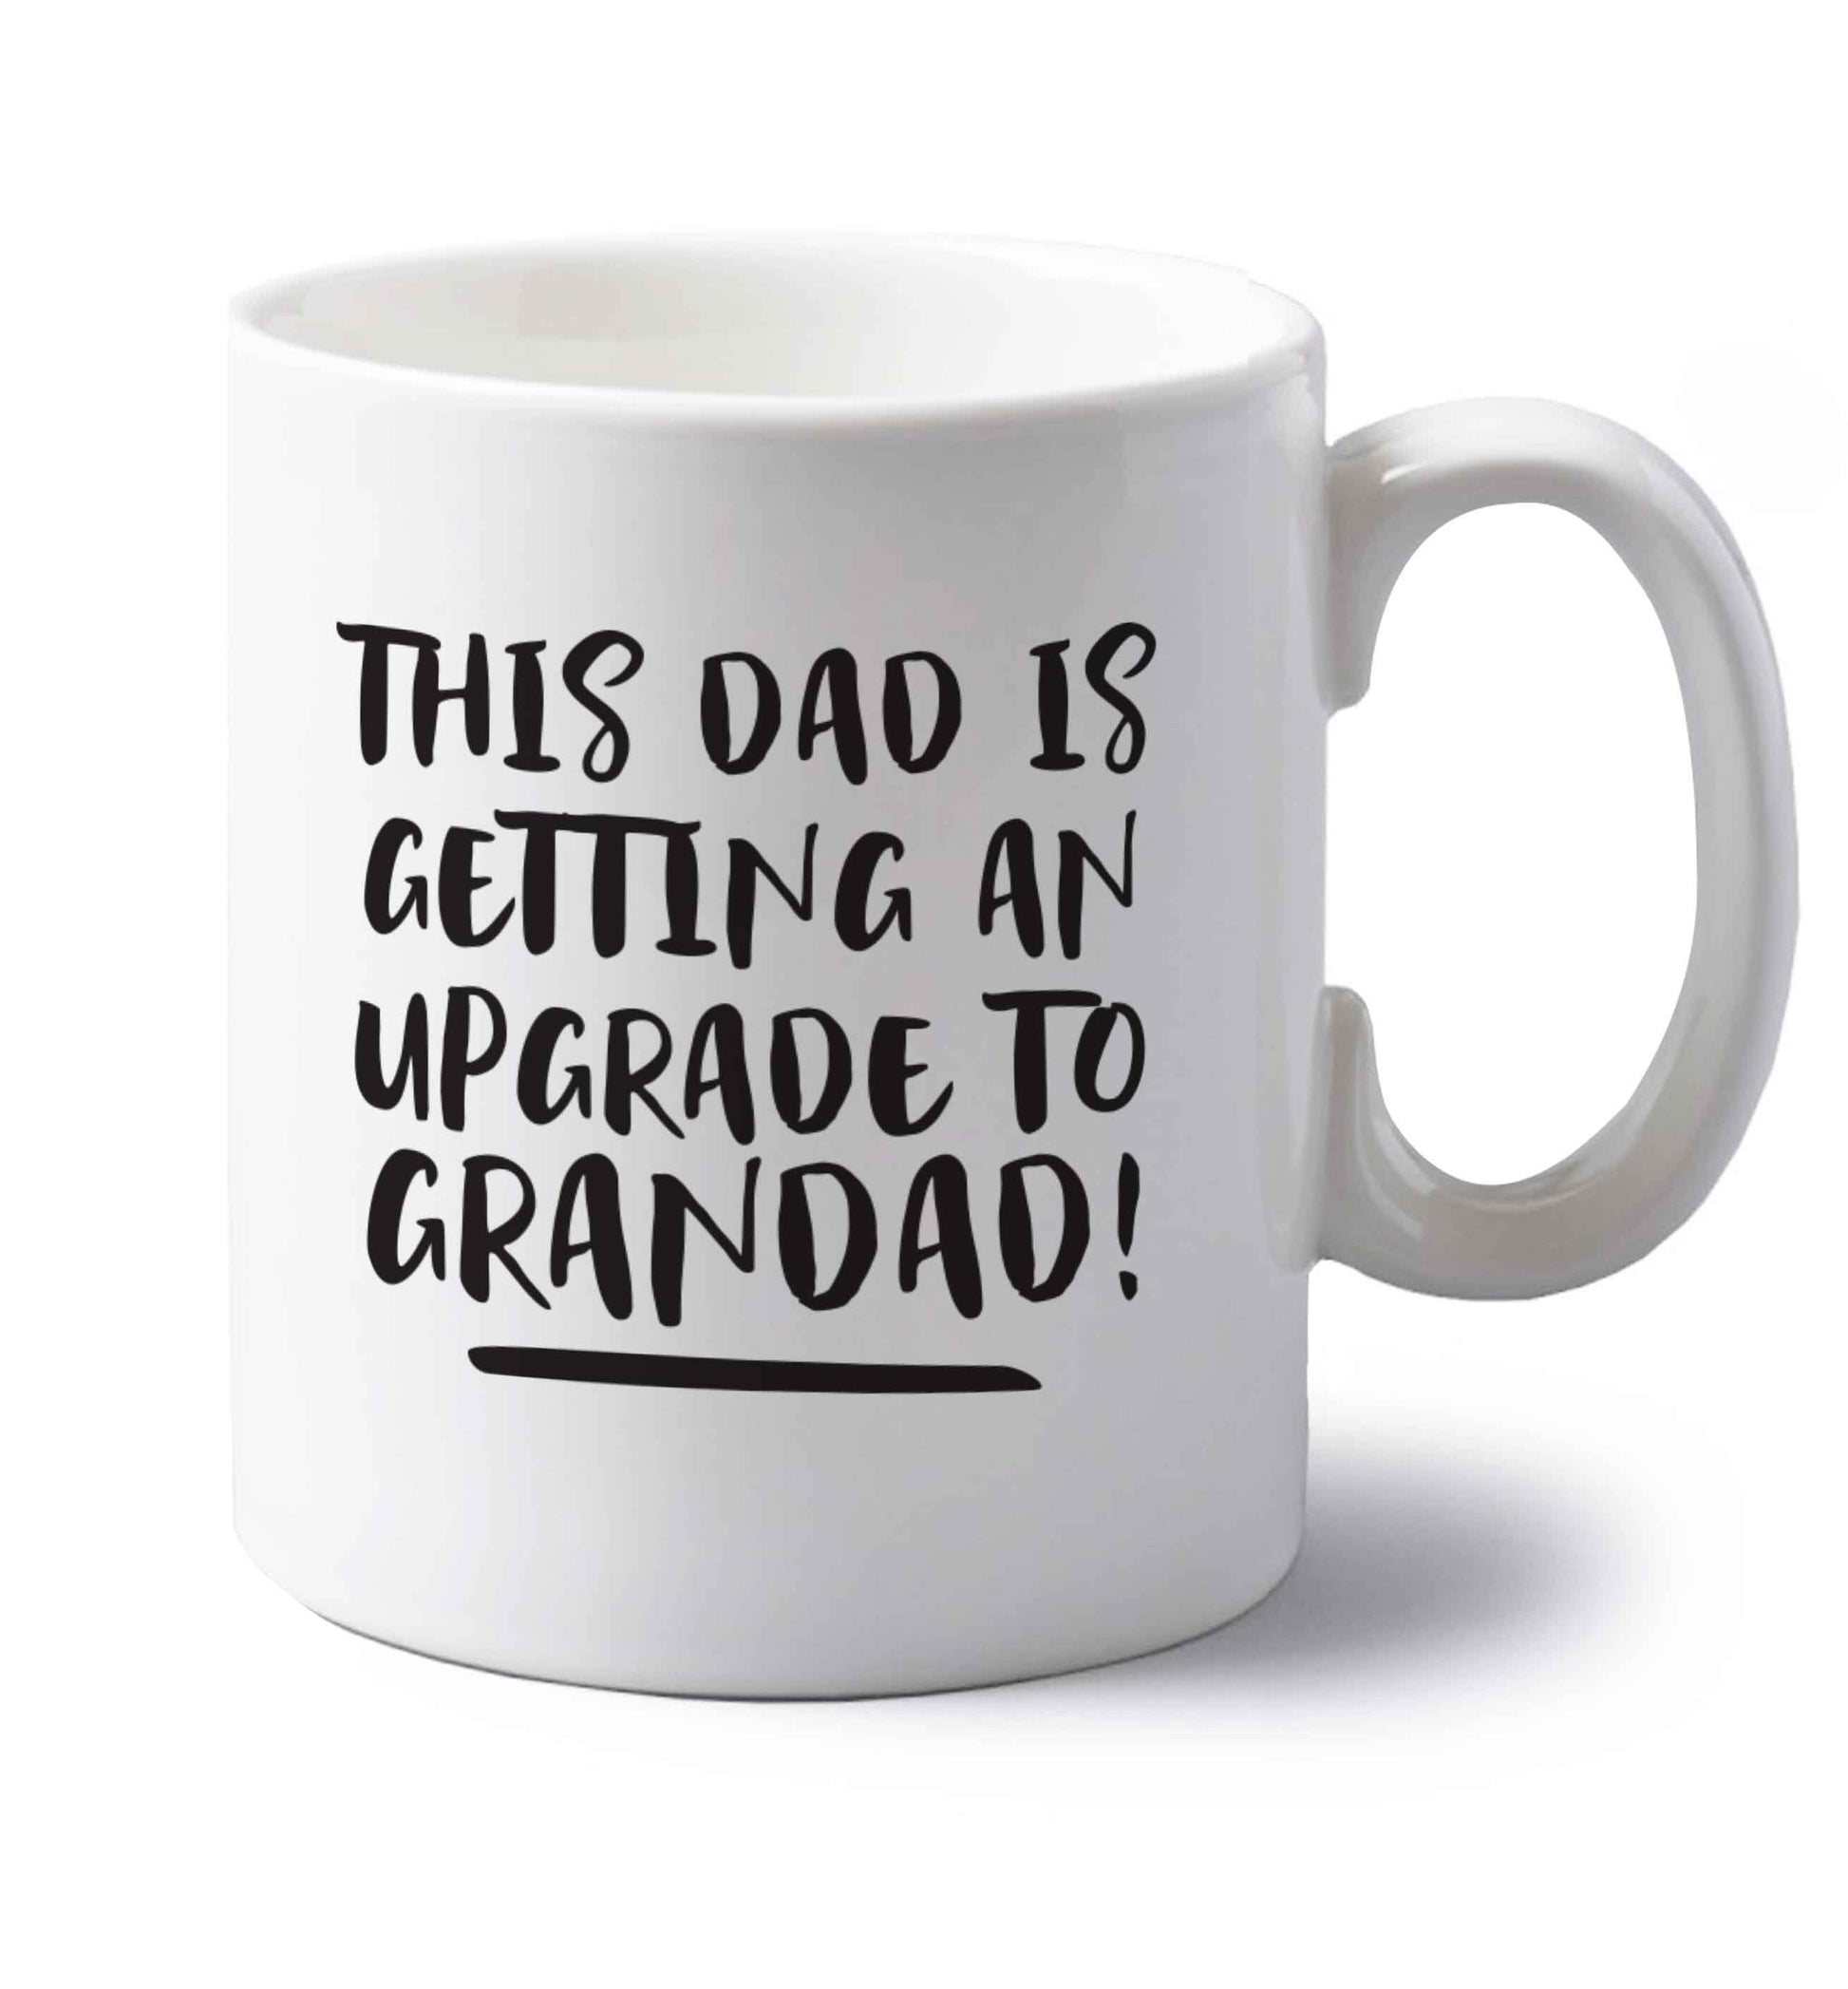 This dad is getting an upgrade to grandad! left handed white ceramic mug 